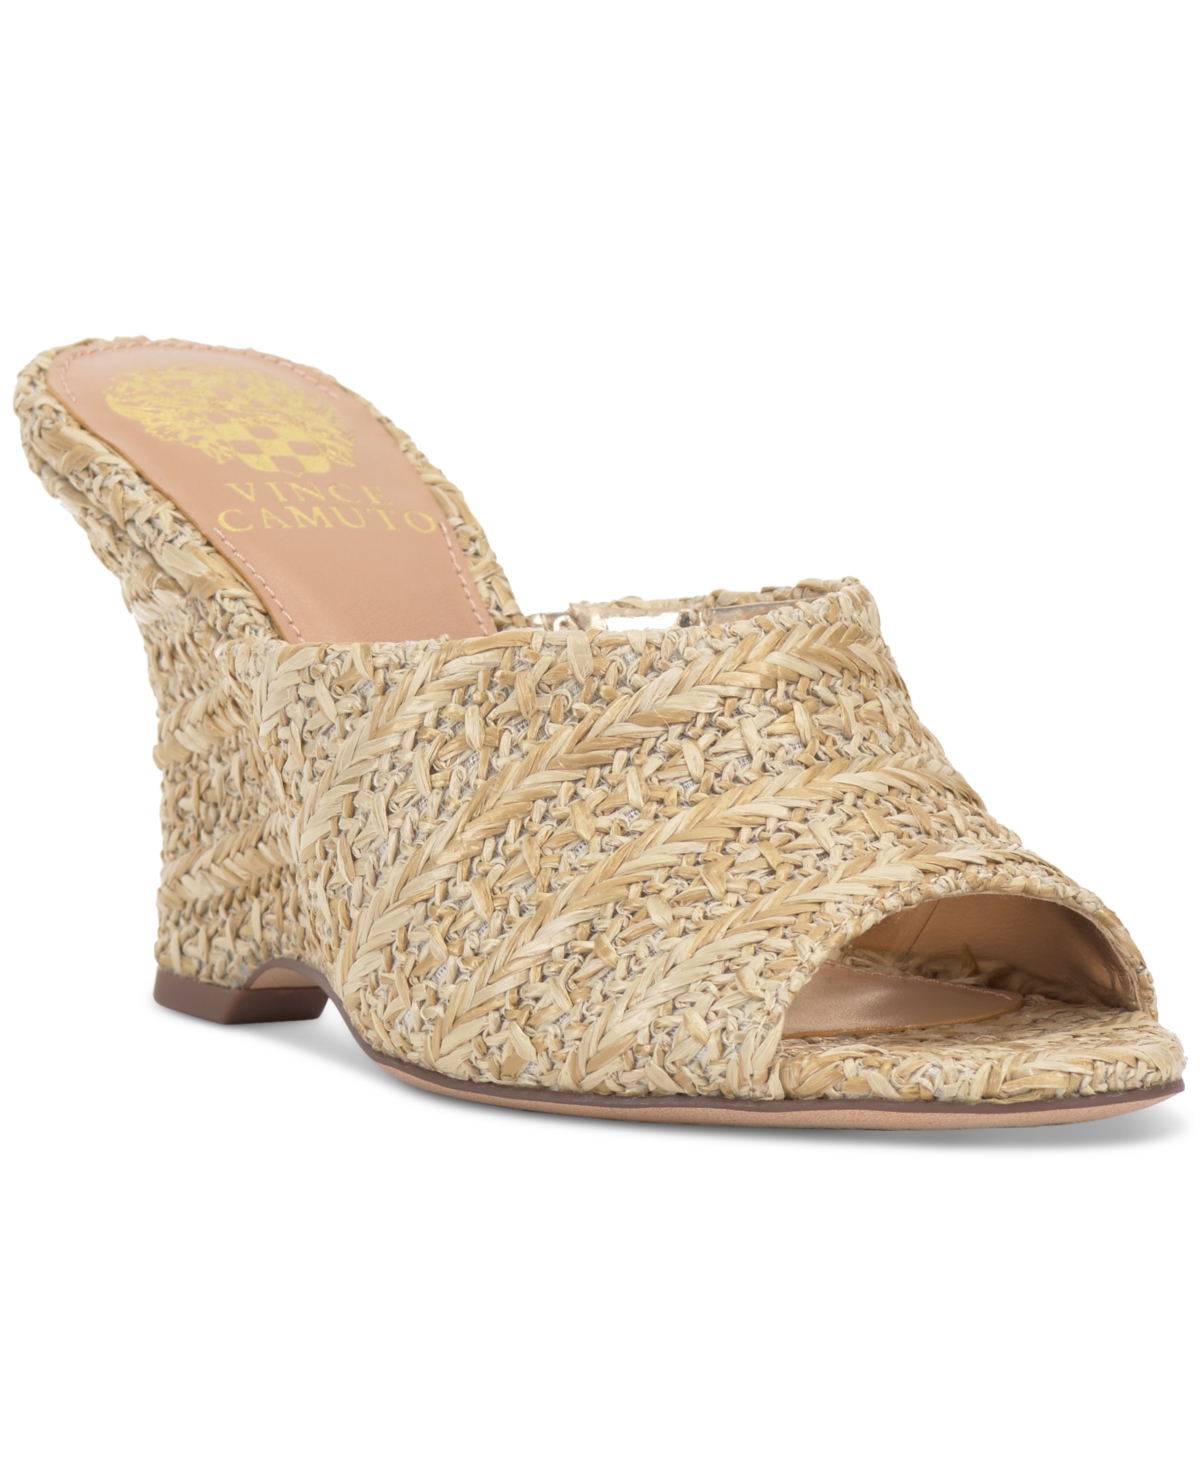 Vince Camuto Women's Vilty Sculpted Slip-On Wedge Sandals - Macy's